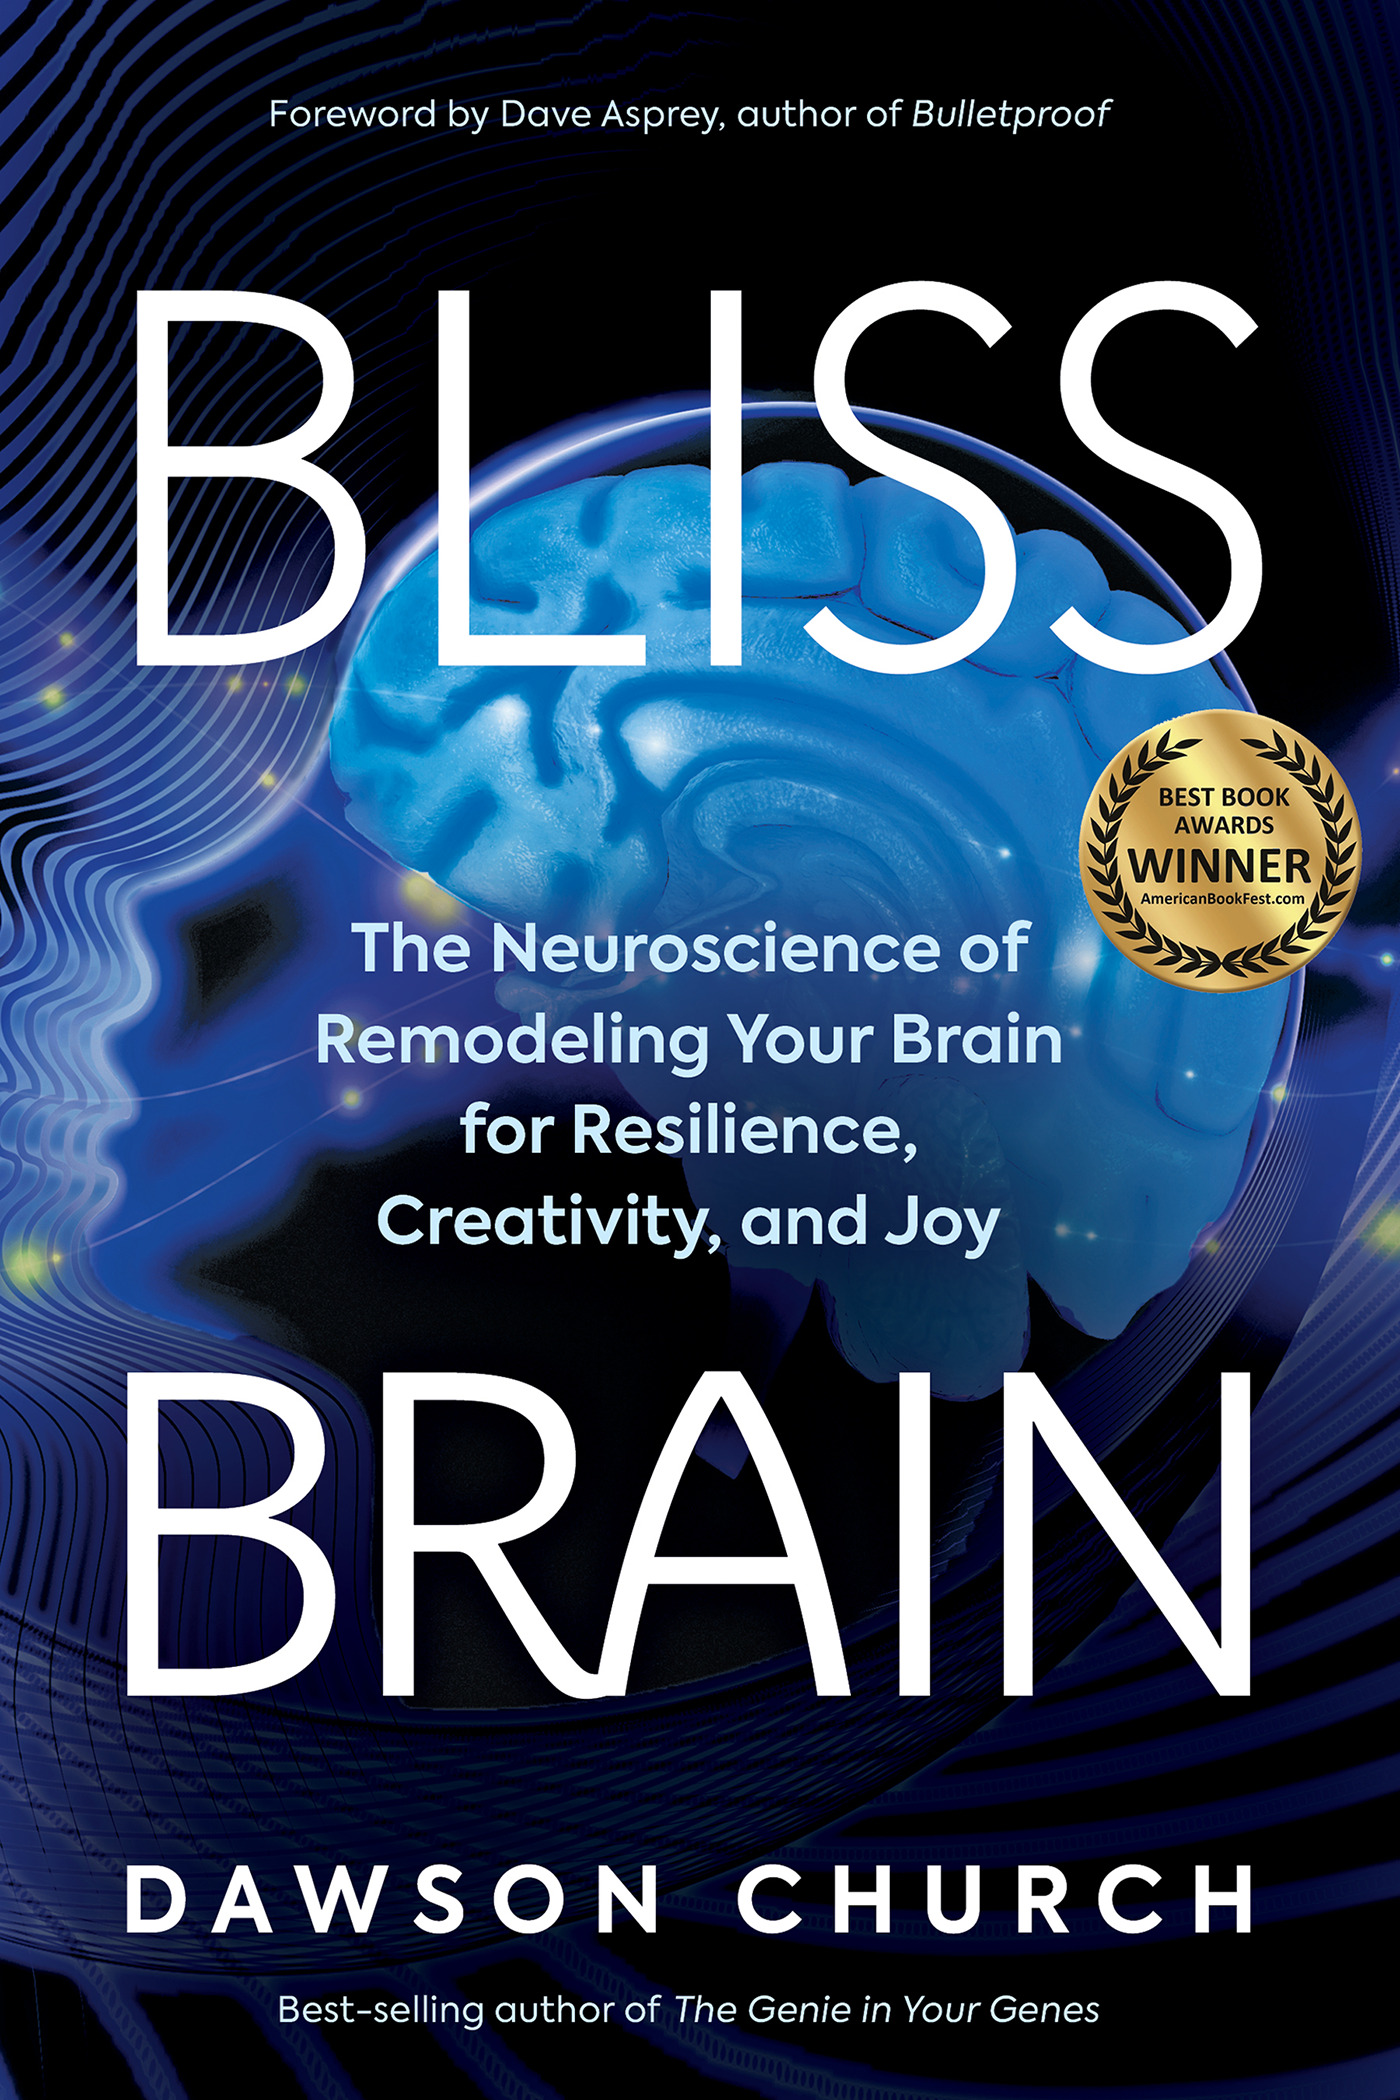 Bliss Brain : The Neuroscience of Remodeling Your Brain for Resilience, Creativity, and Joy | Psychology & Self-Improvement